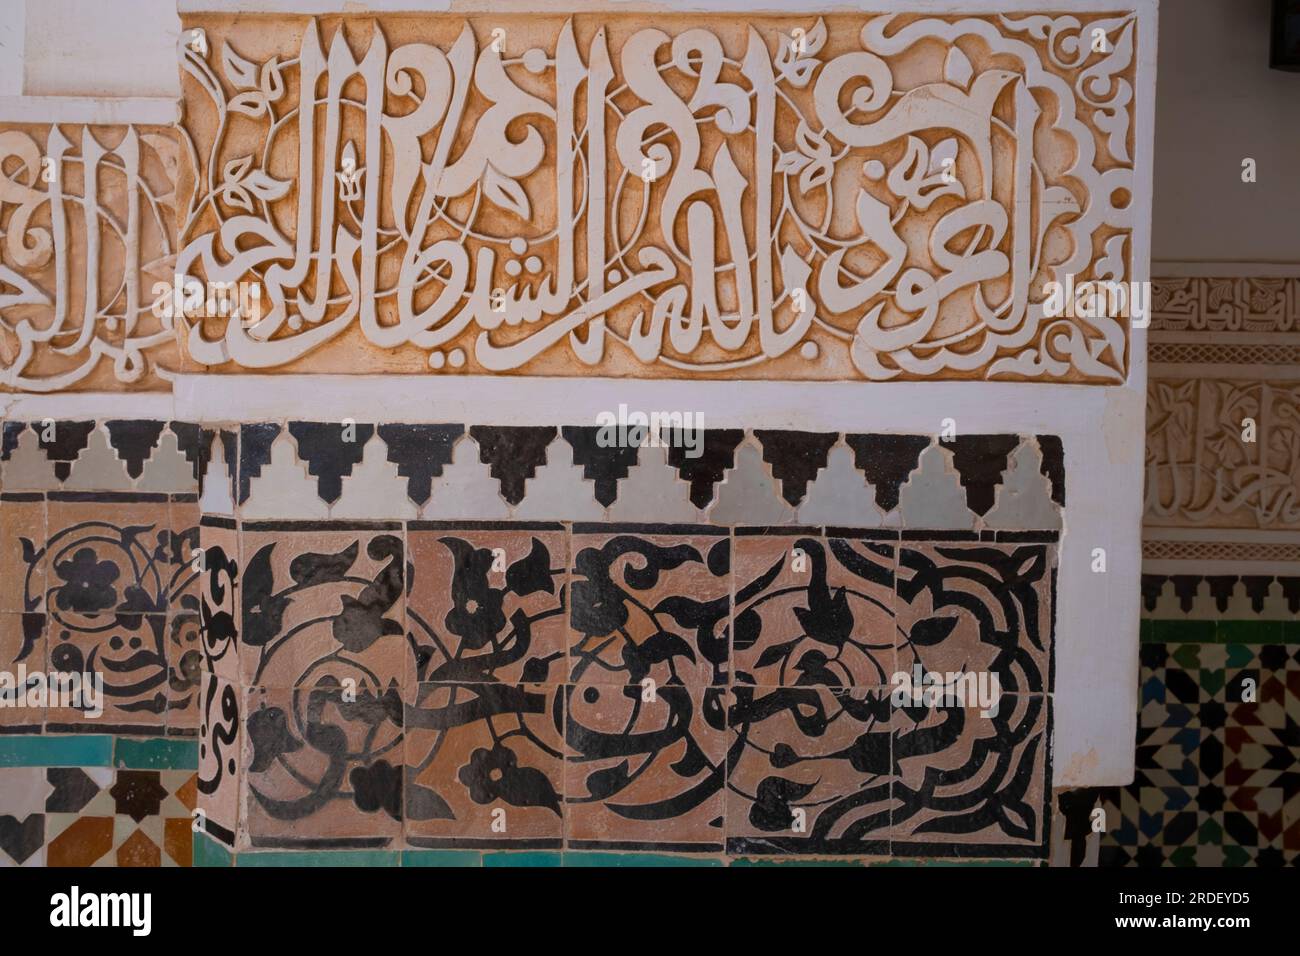 Morocco: Decorative Quranic verses (top), Ben Youssef Madrasa (Medersa Ben Youssef), Medina of Marrakesh, Marrakesh. The Saadian Dynasty sultan, Abdallah al-Ghalib Billah (1517 - 1574), built the madrasa in 1565 (972 AH). It was once the largest Islamic college in the Maghreb (Northwest Africa). Stock Photo